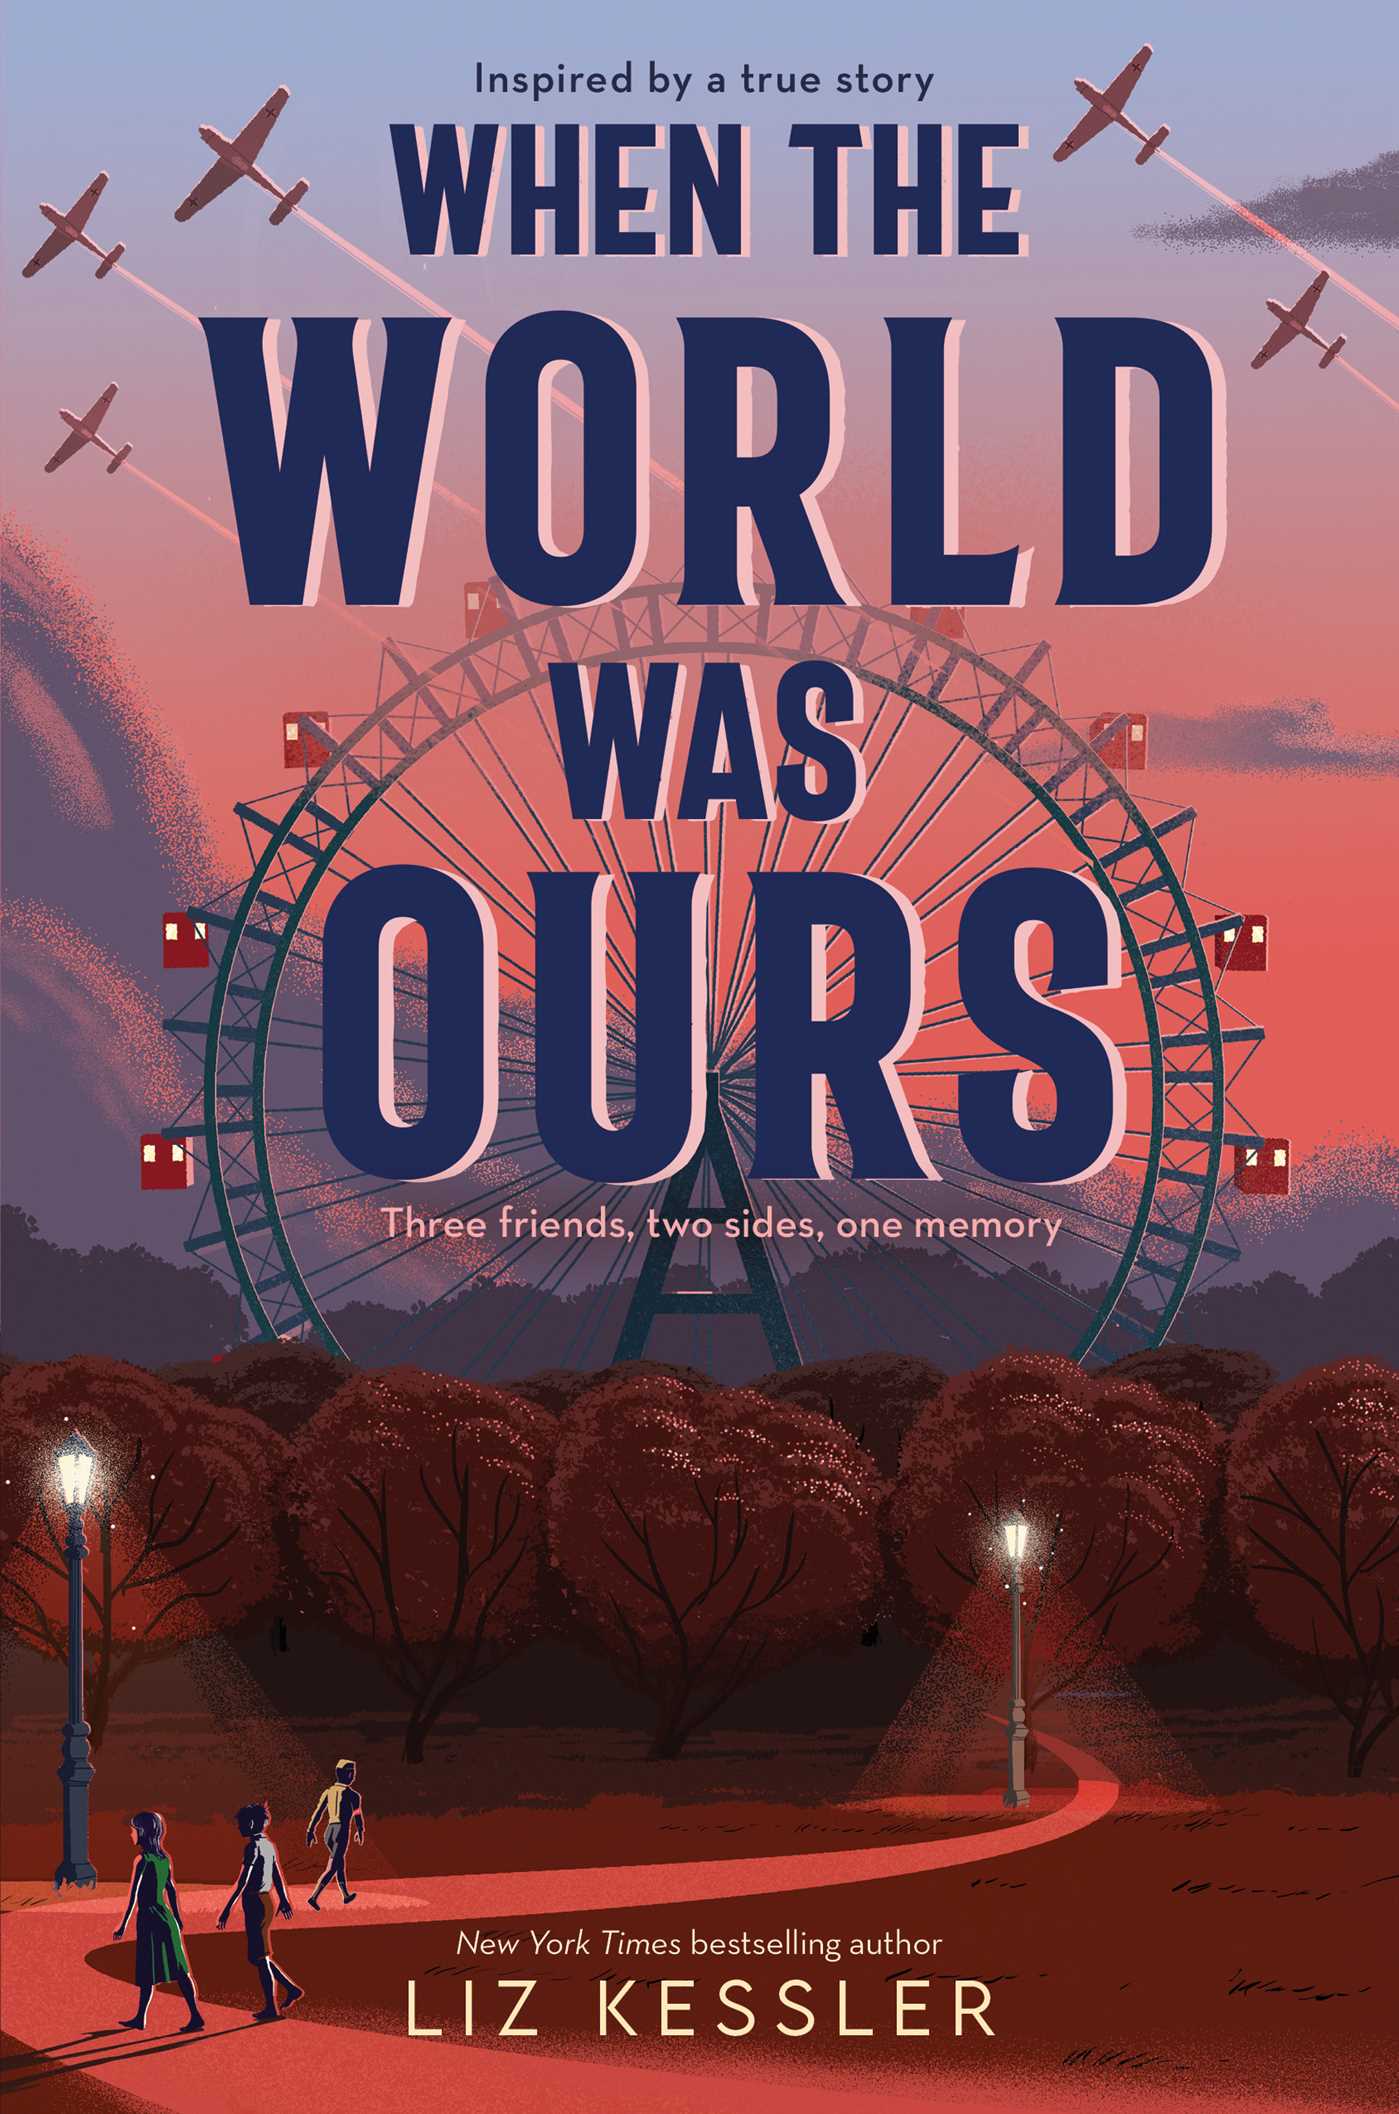 When the world was ours book cover